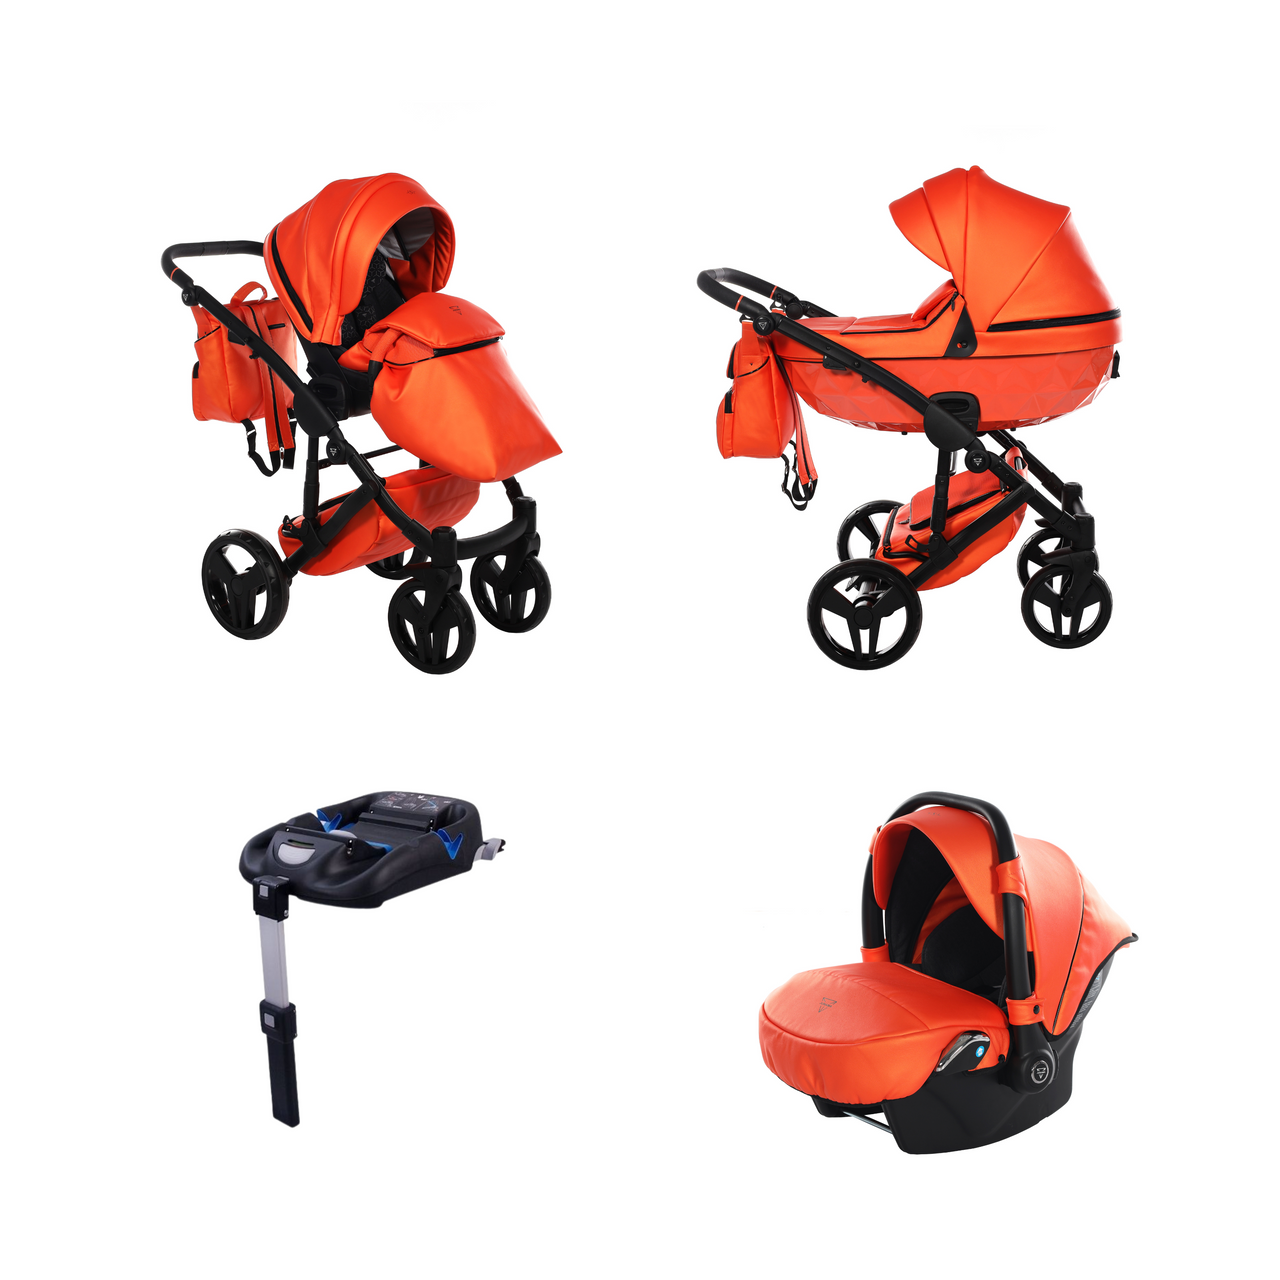 Junama S-Class 3 In 1 Travel System - Orange - Yes | For Your Little One